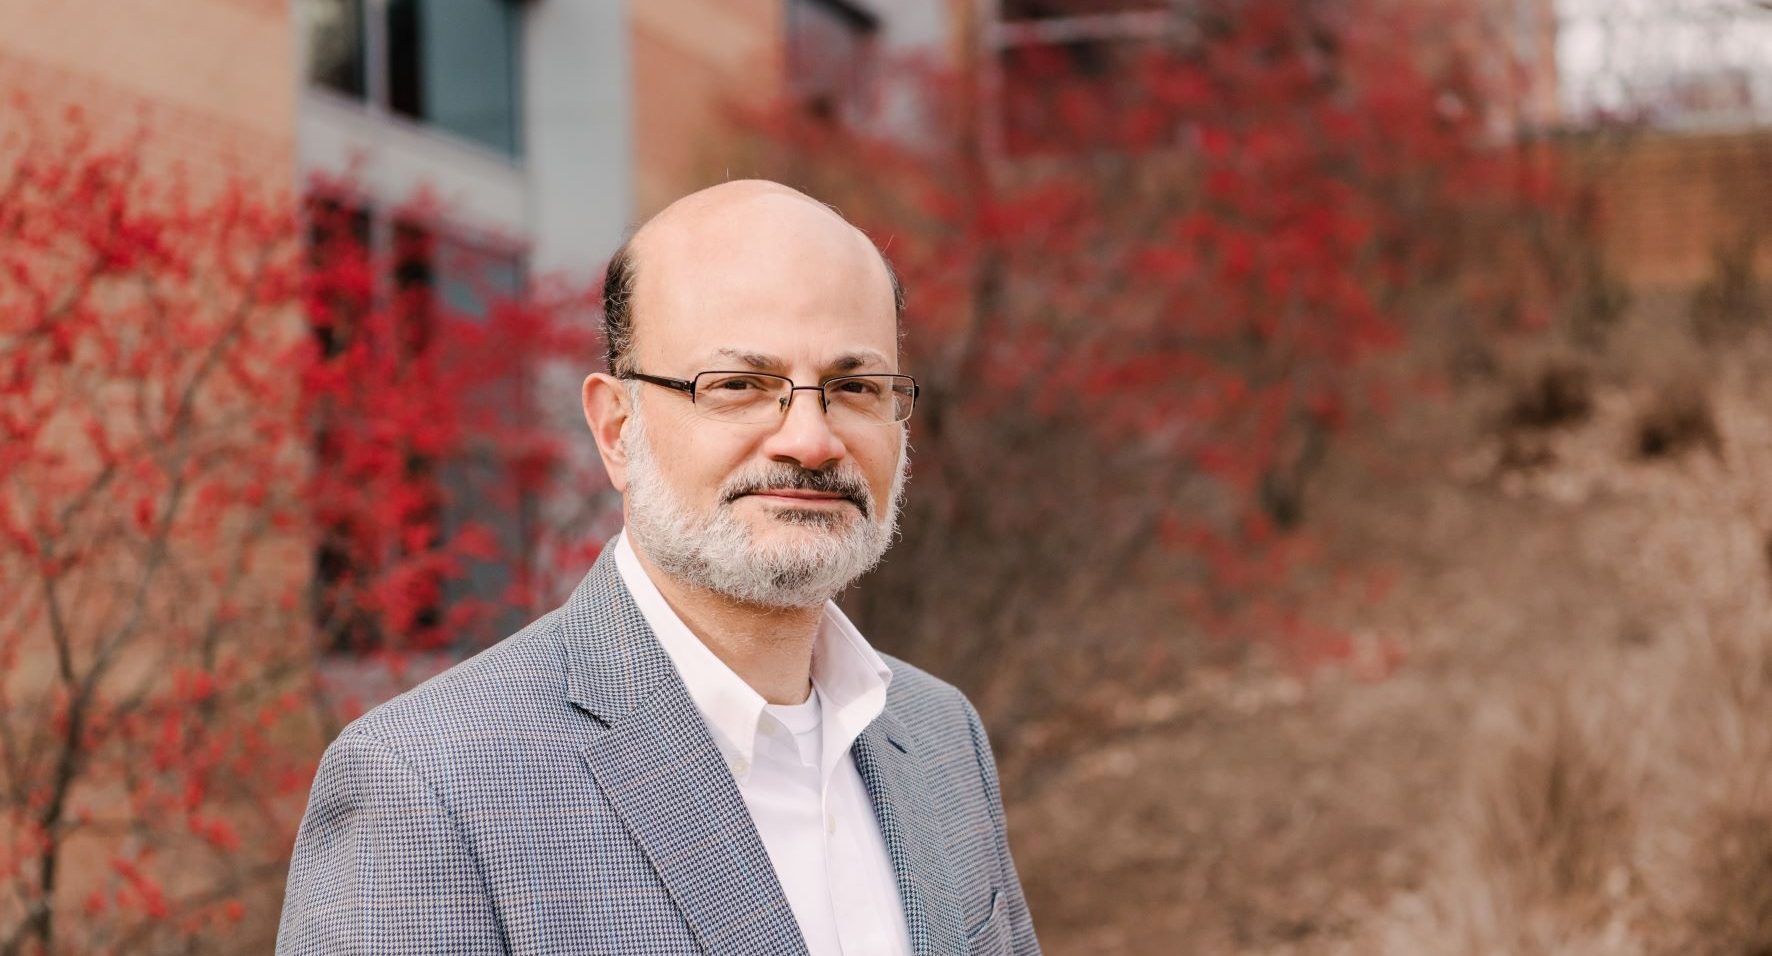 UMBC’s Mohamed Younis earns IEEE Fellow distinction as a leader in wireless network research